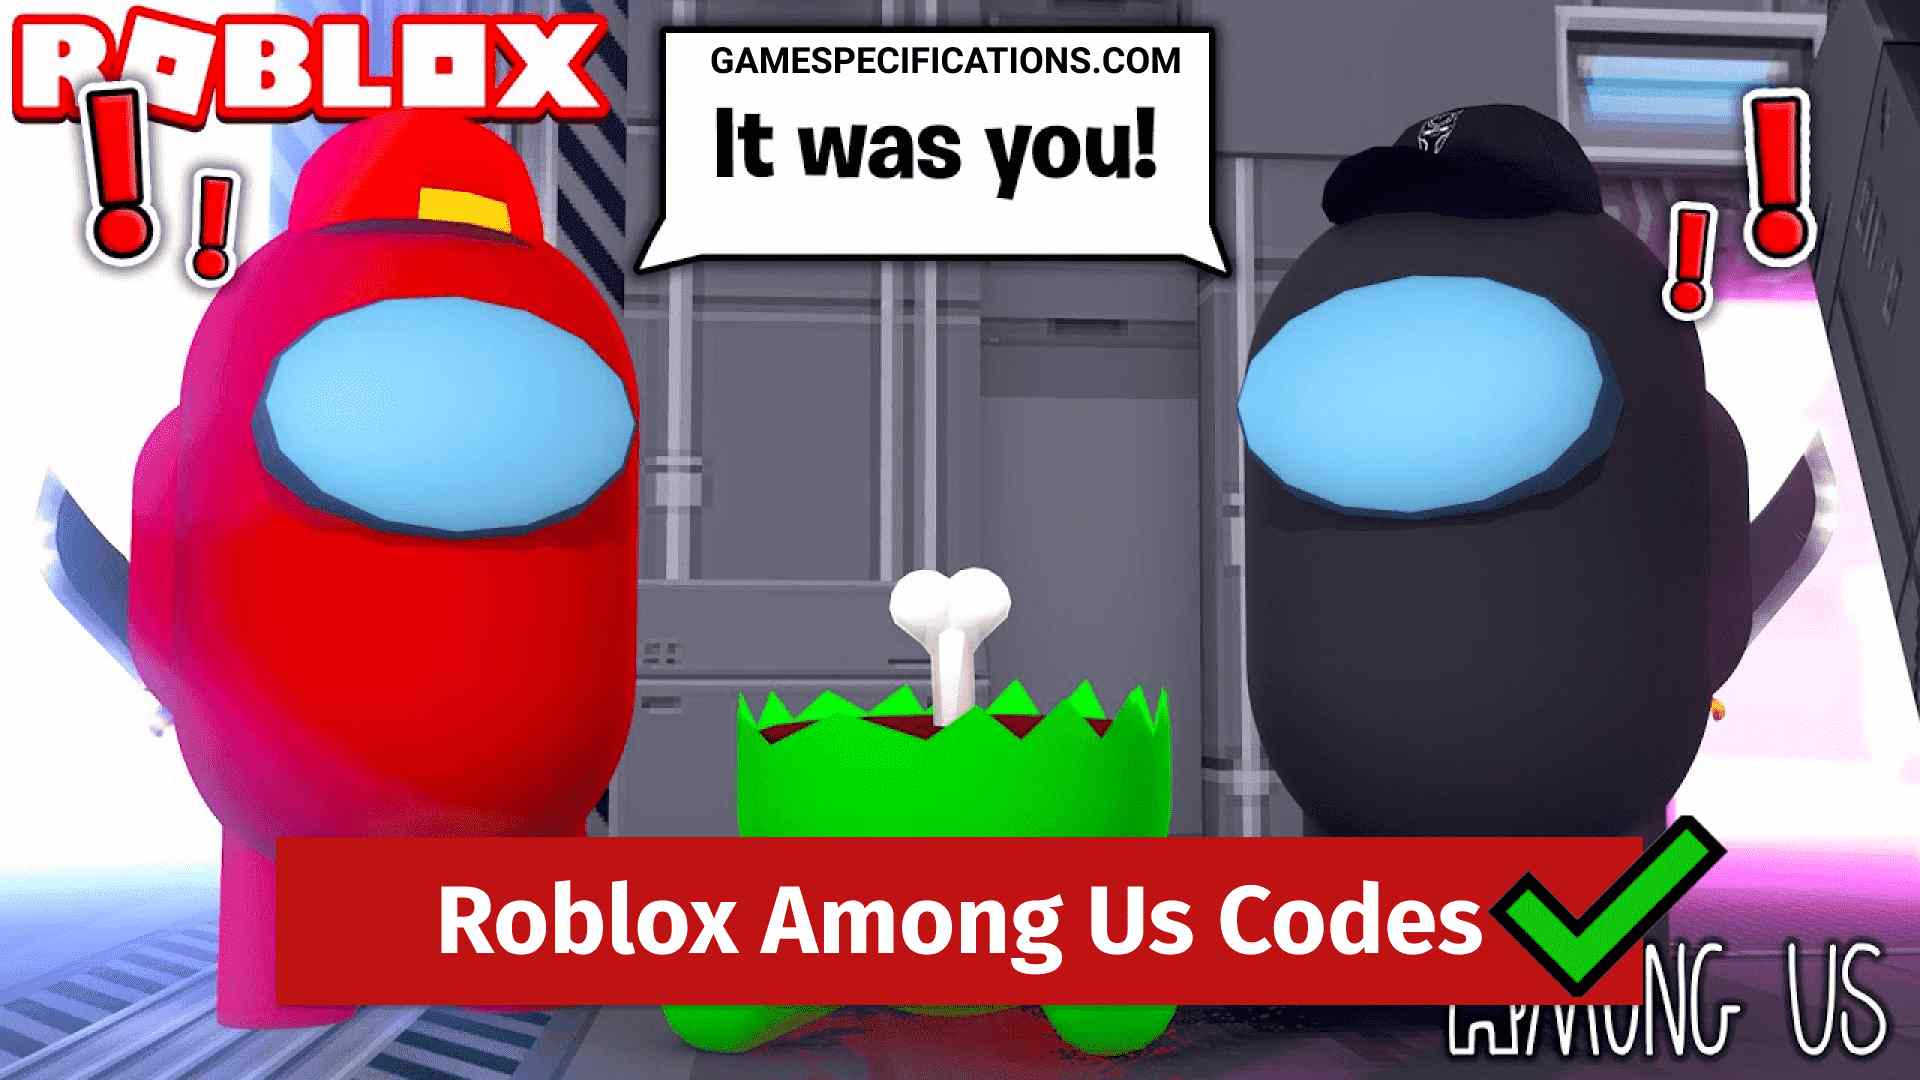 3 Roblox Among Us Codes For Free Pets [July 2022] Game Specifications